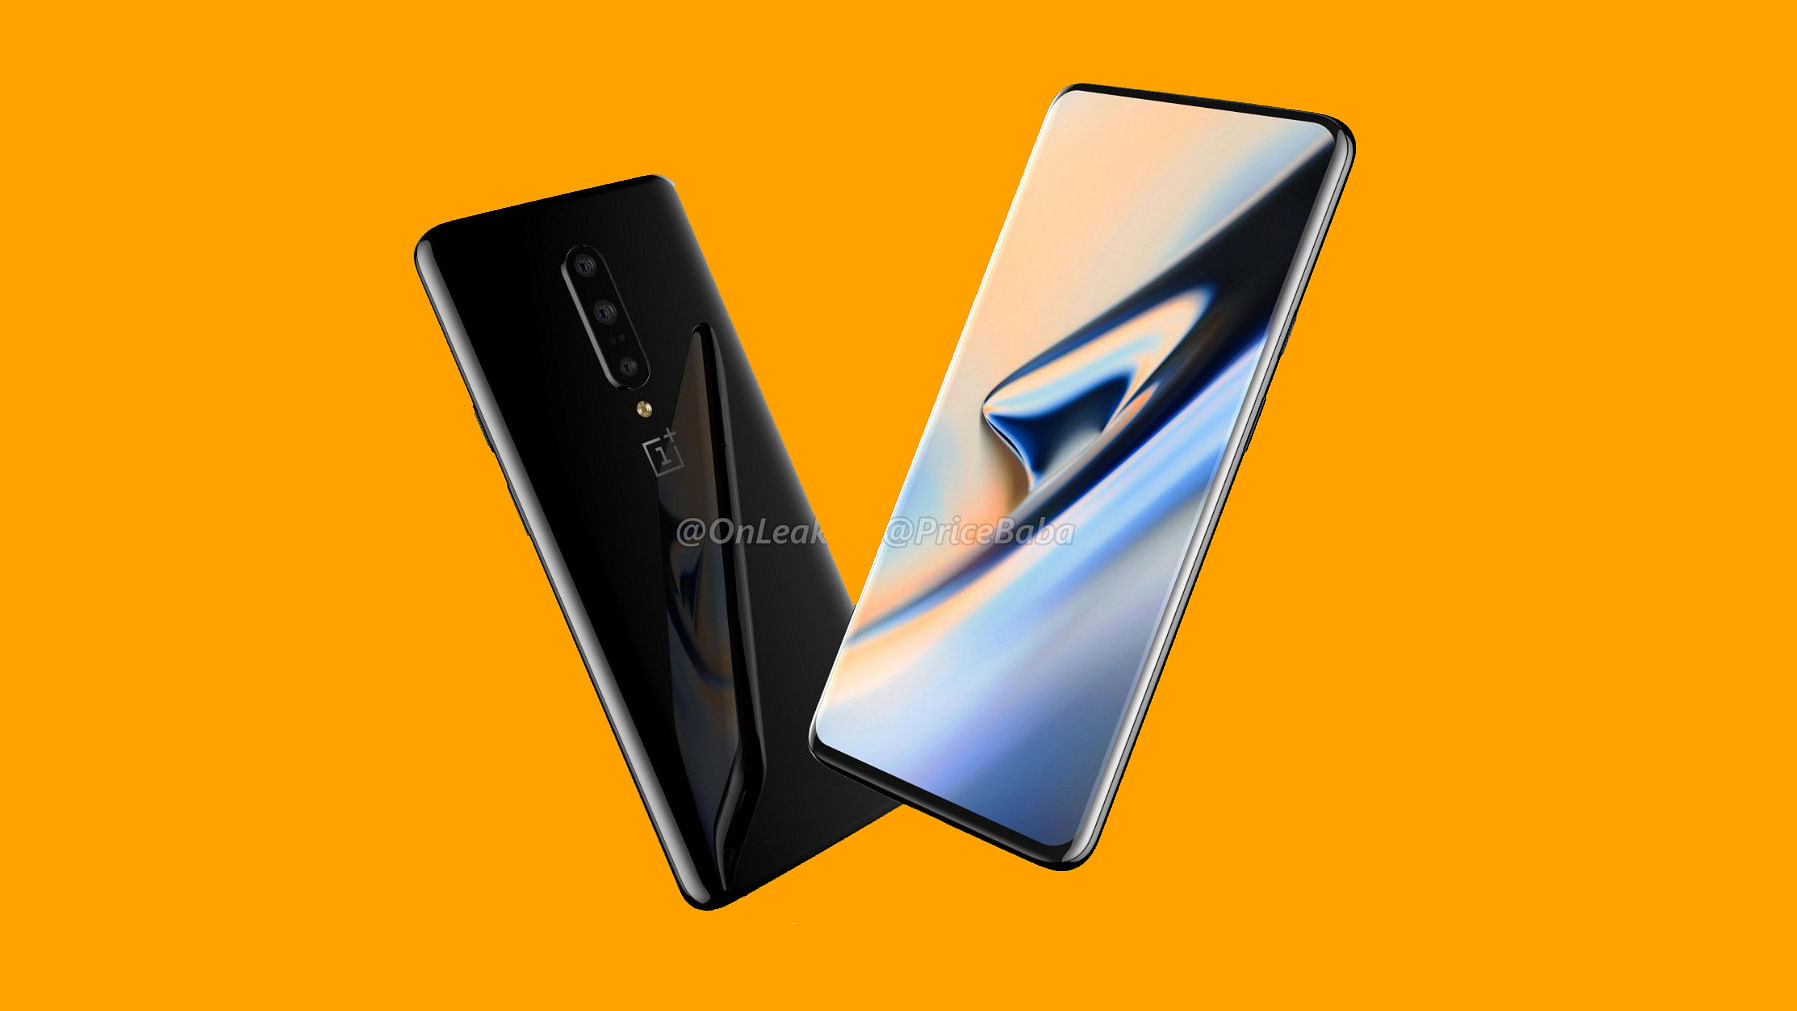 OnePlus 7 Pro will be available for pre-booking today.